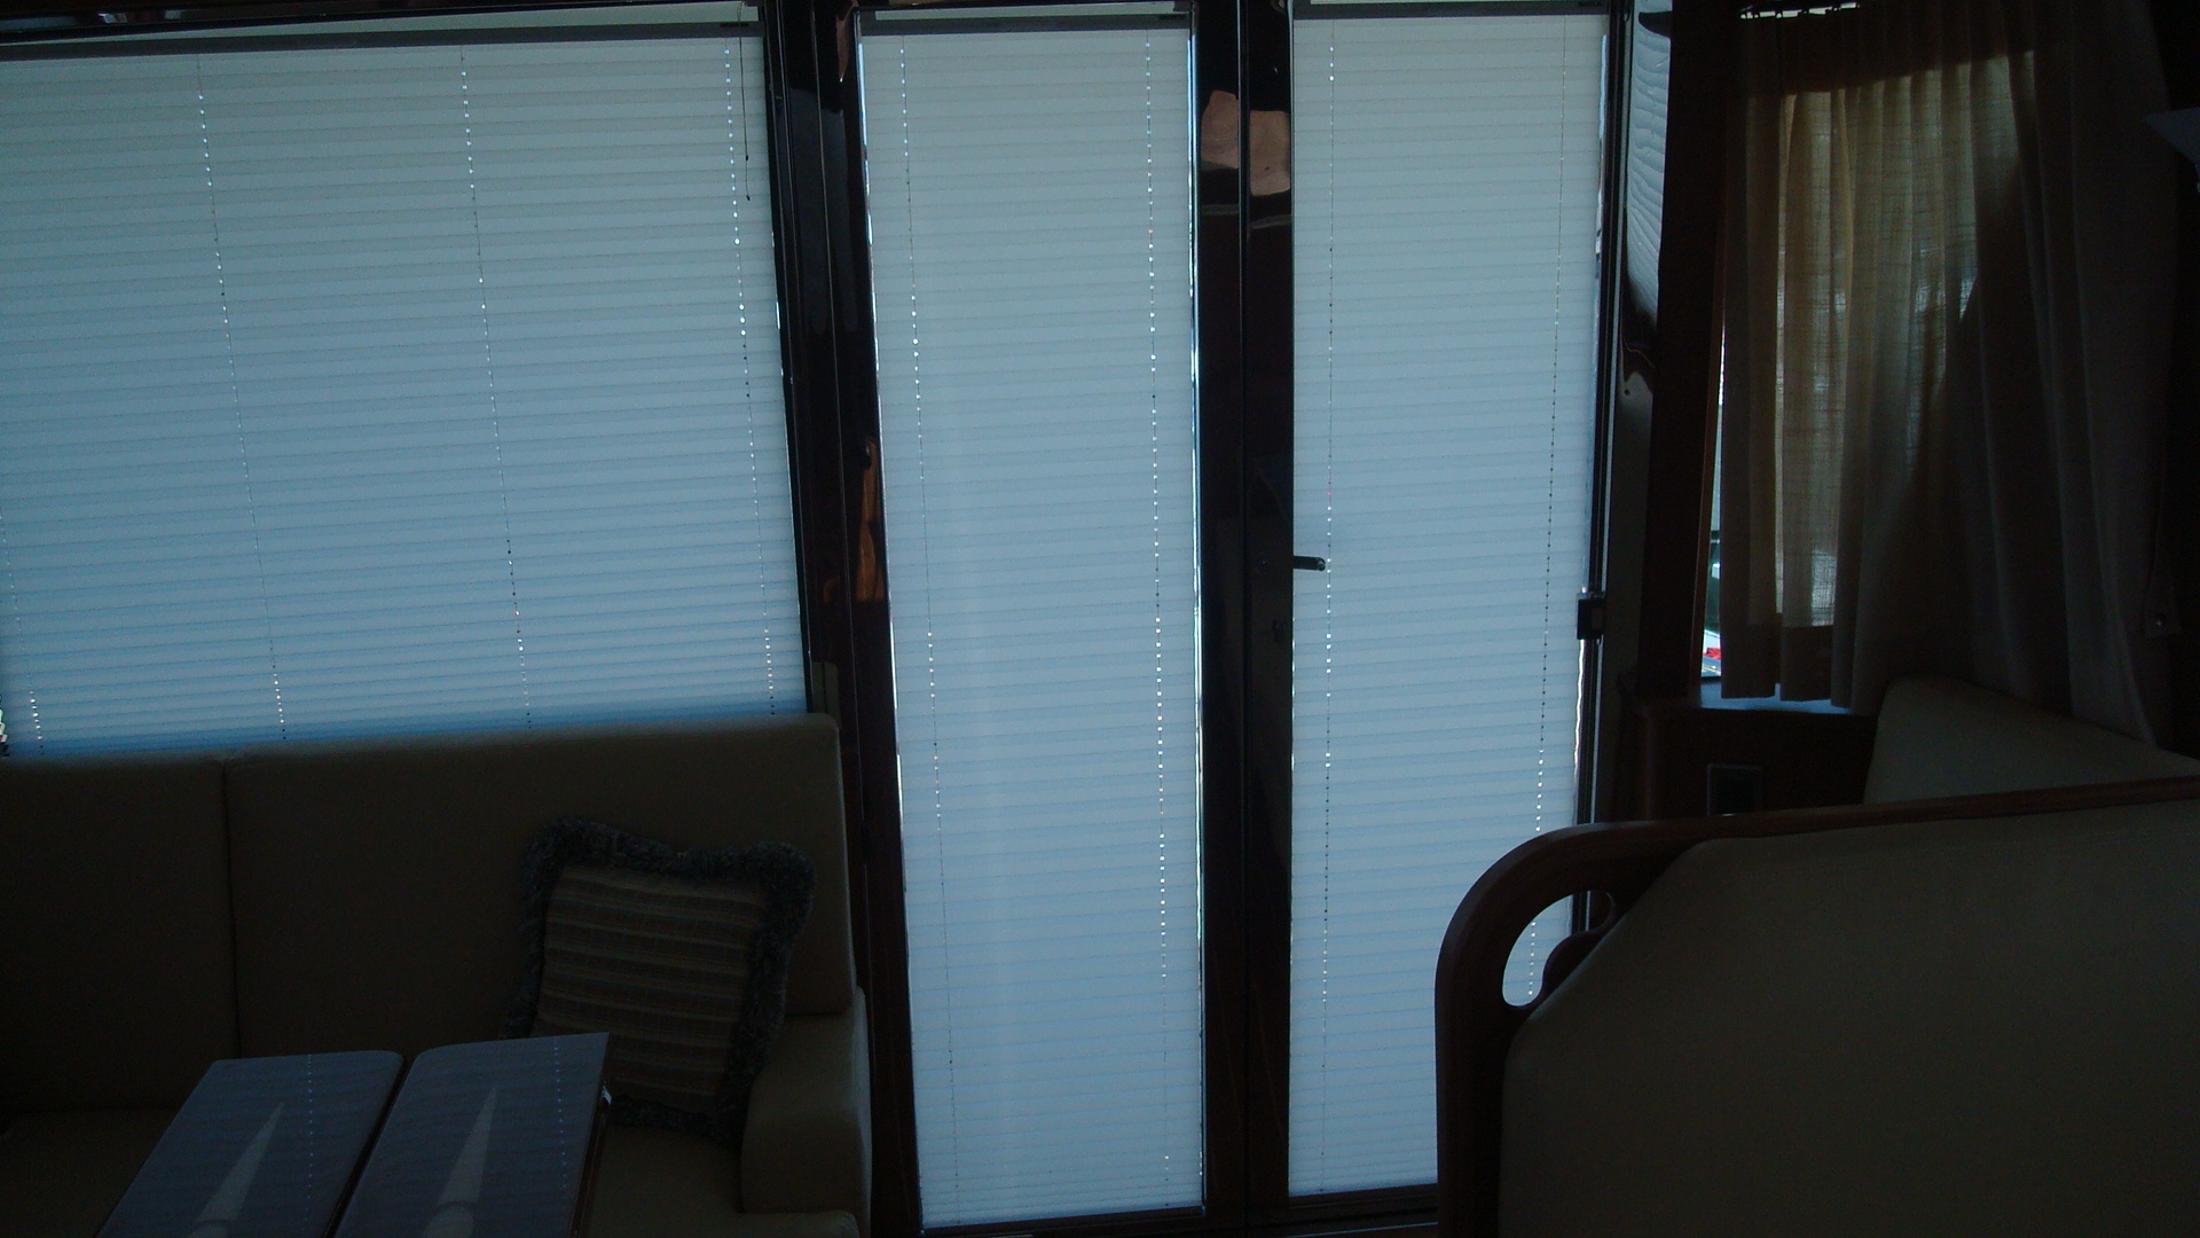 Blinds for Privacy